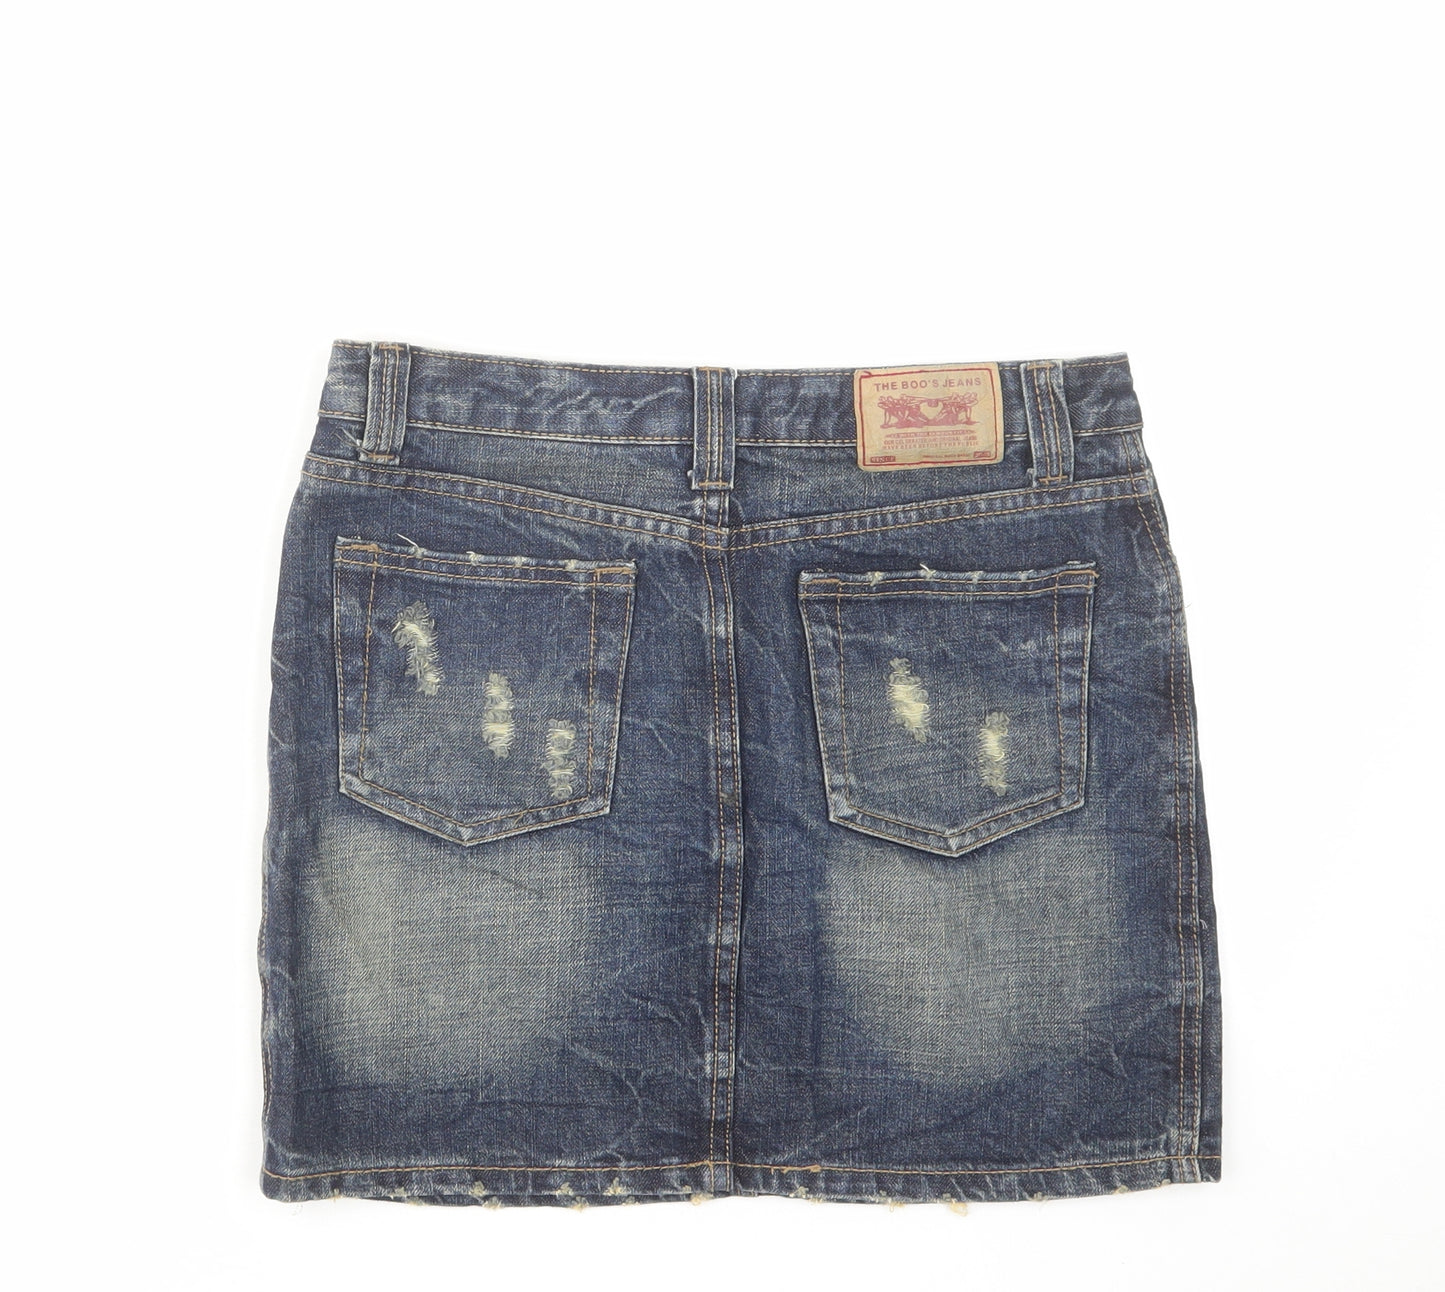 Boo's Jeans Womens Blue Cotton Mini Skirt Size M Zip - Distressed look